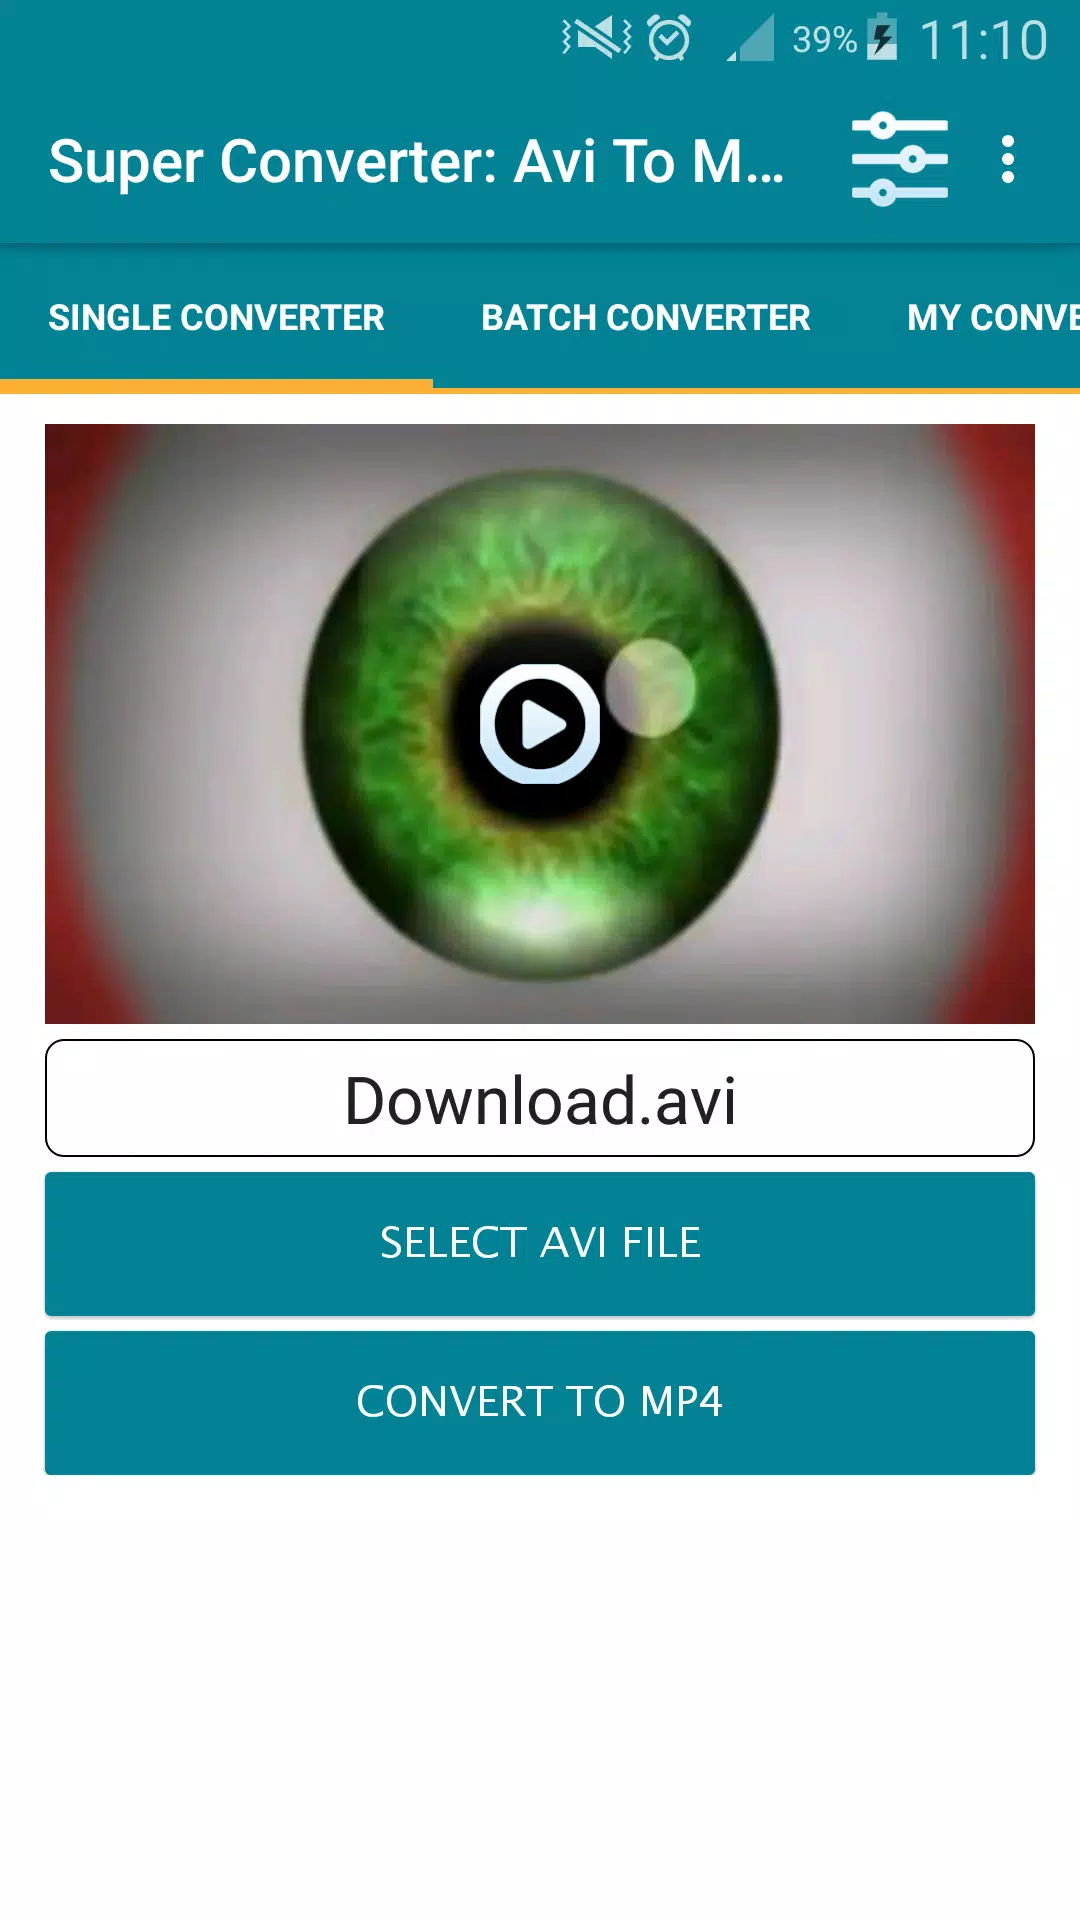 Super Converter : AVI To MP4 for Android - APK Download